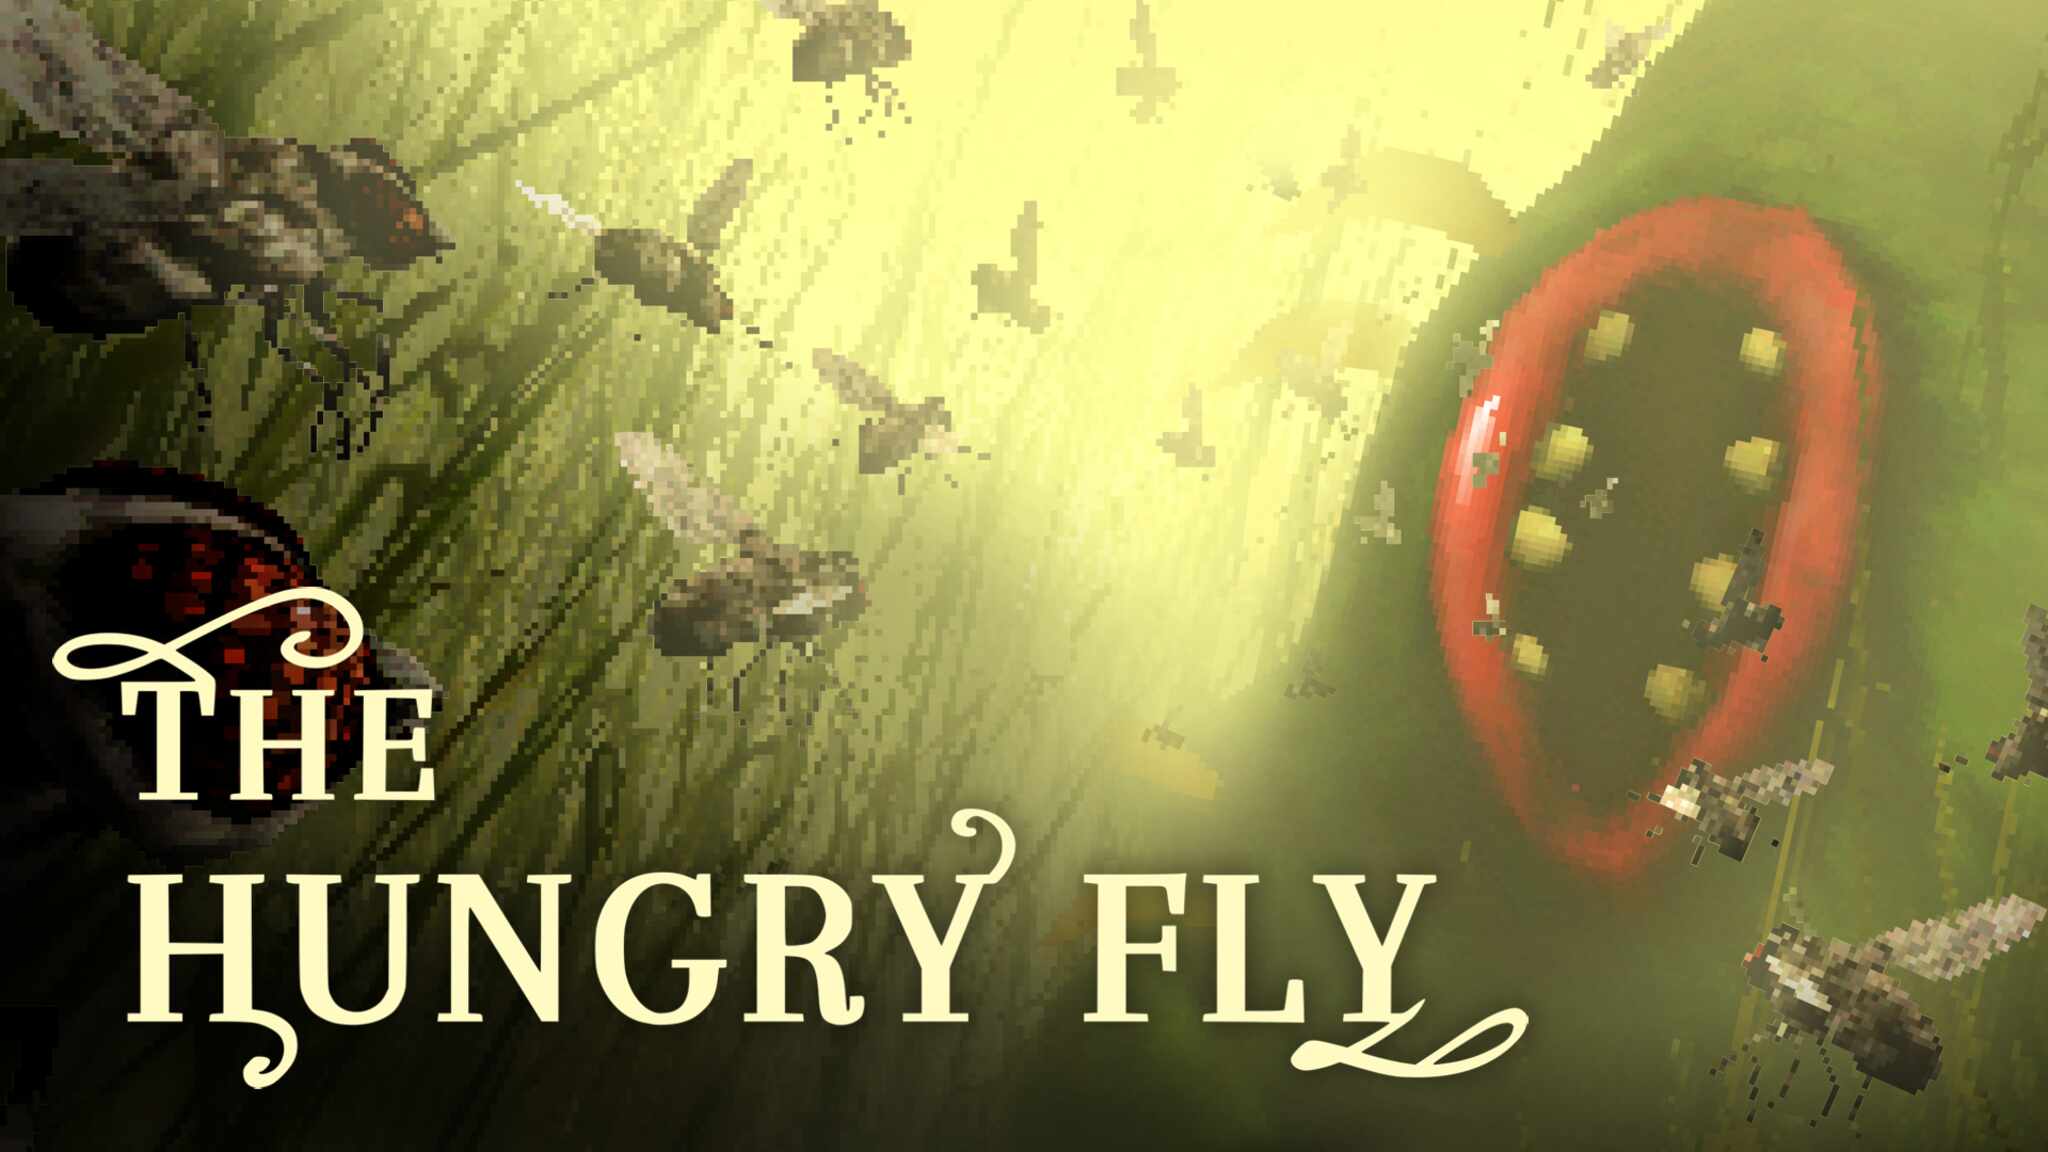 The Hungry Fly